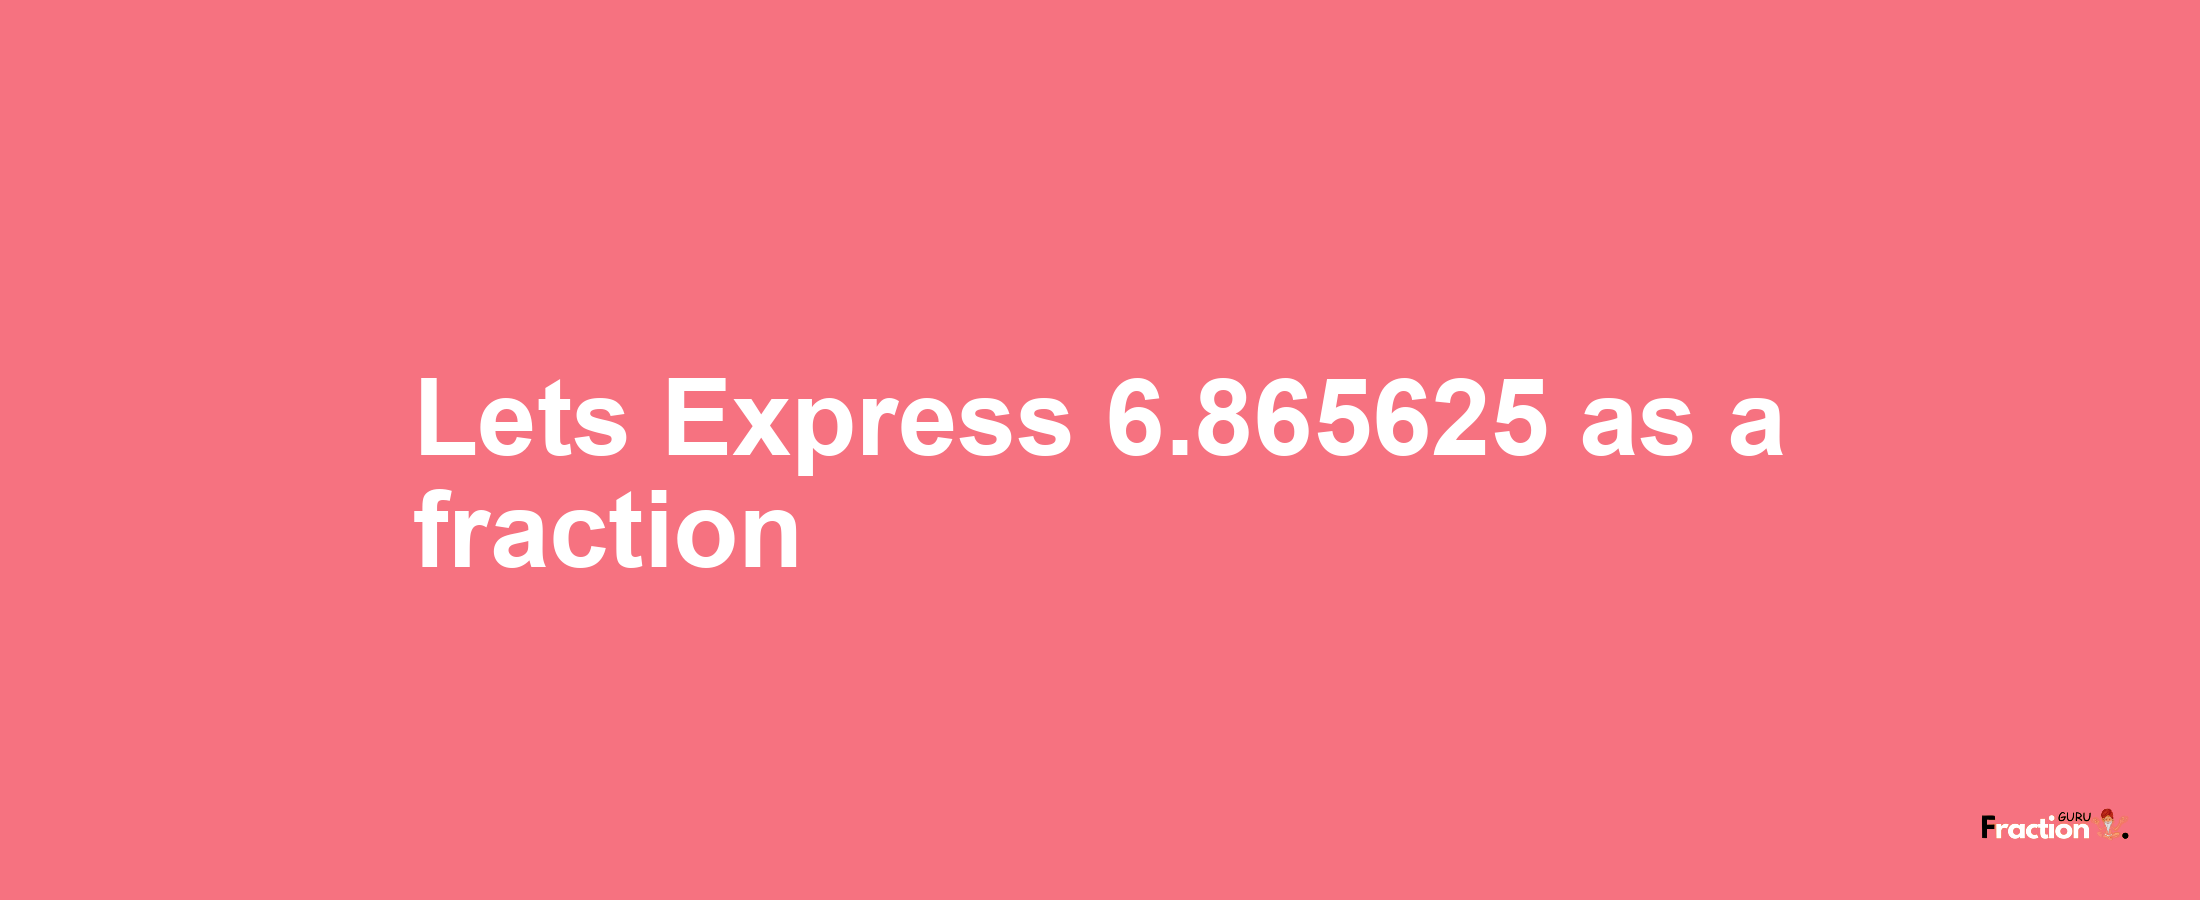 Lets Express 6.865625 as afraction